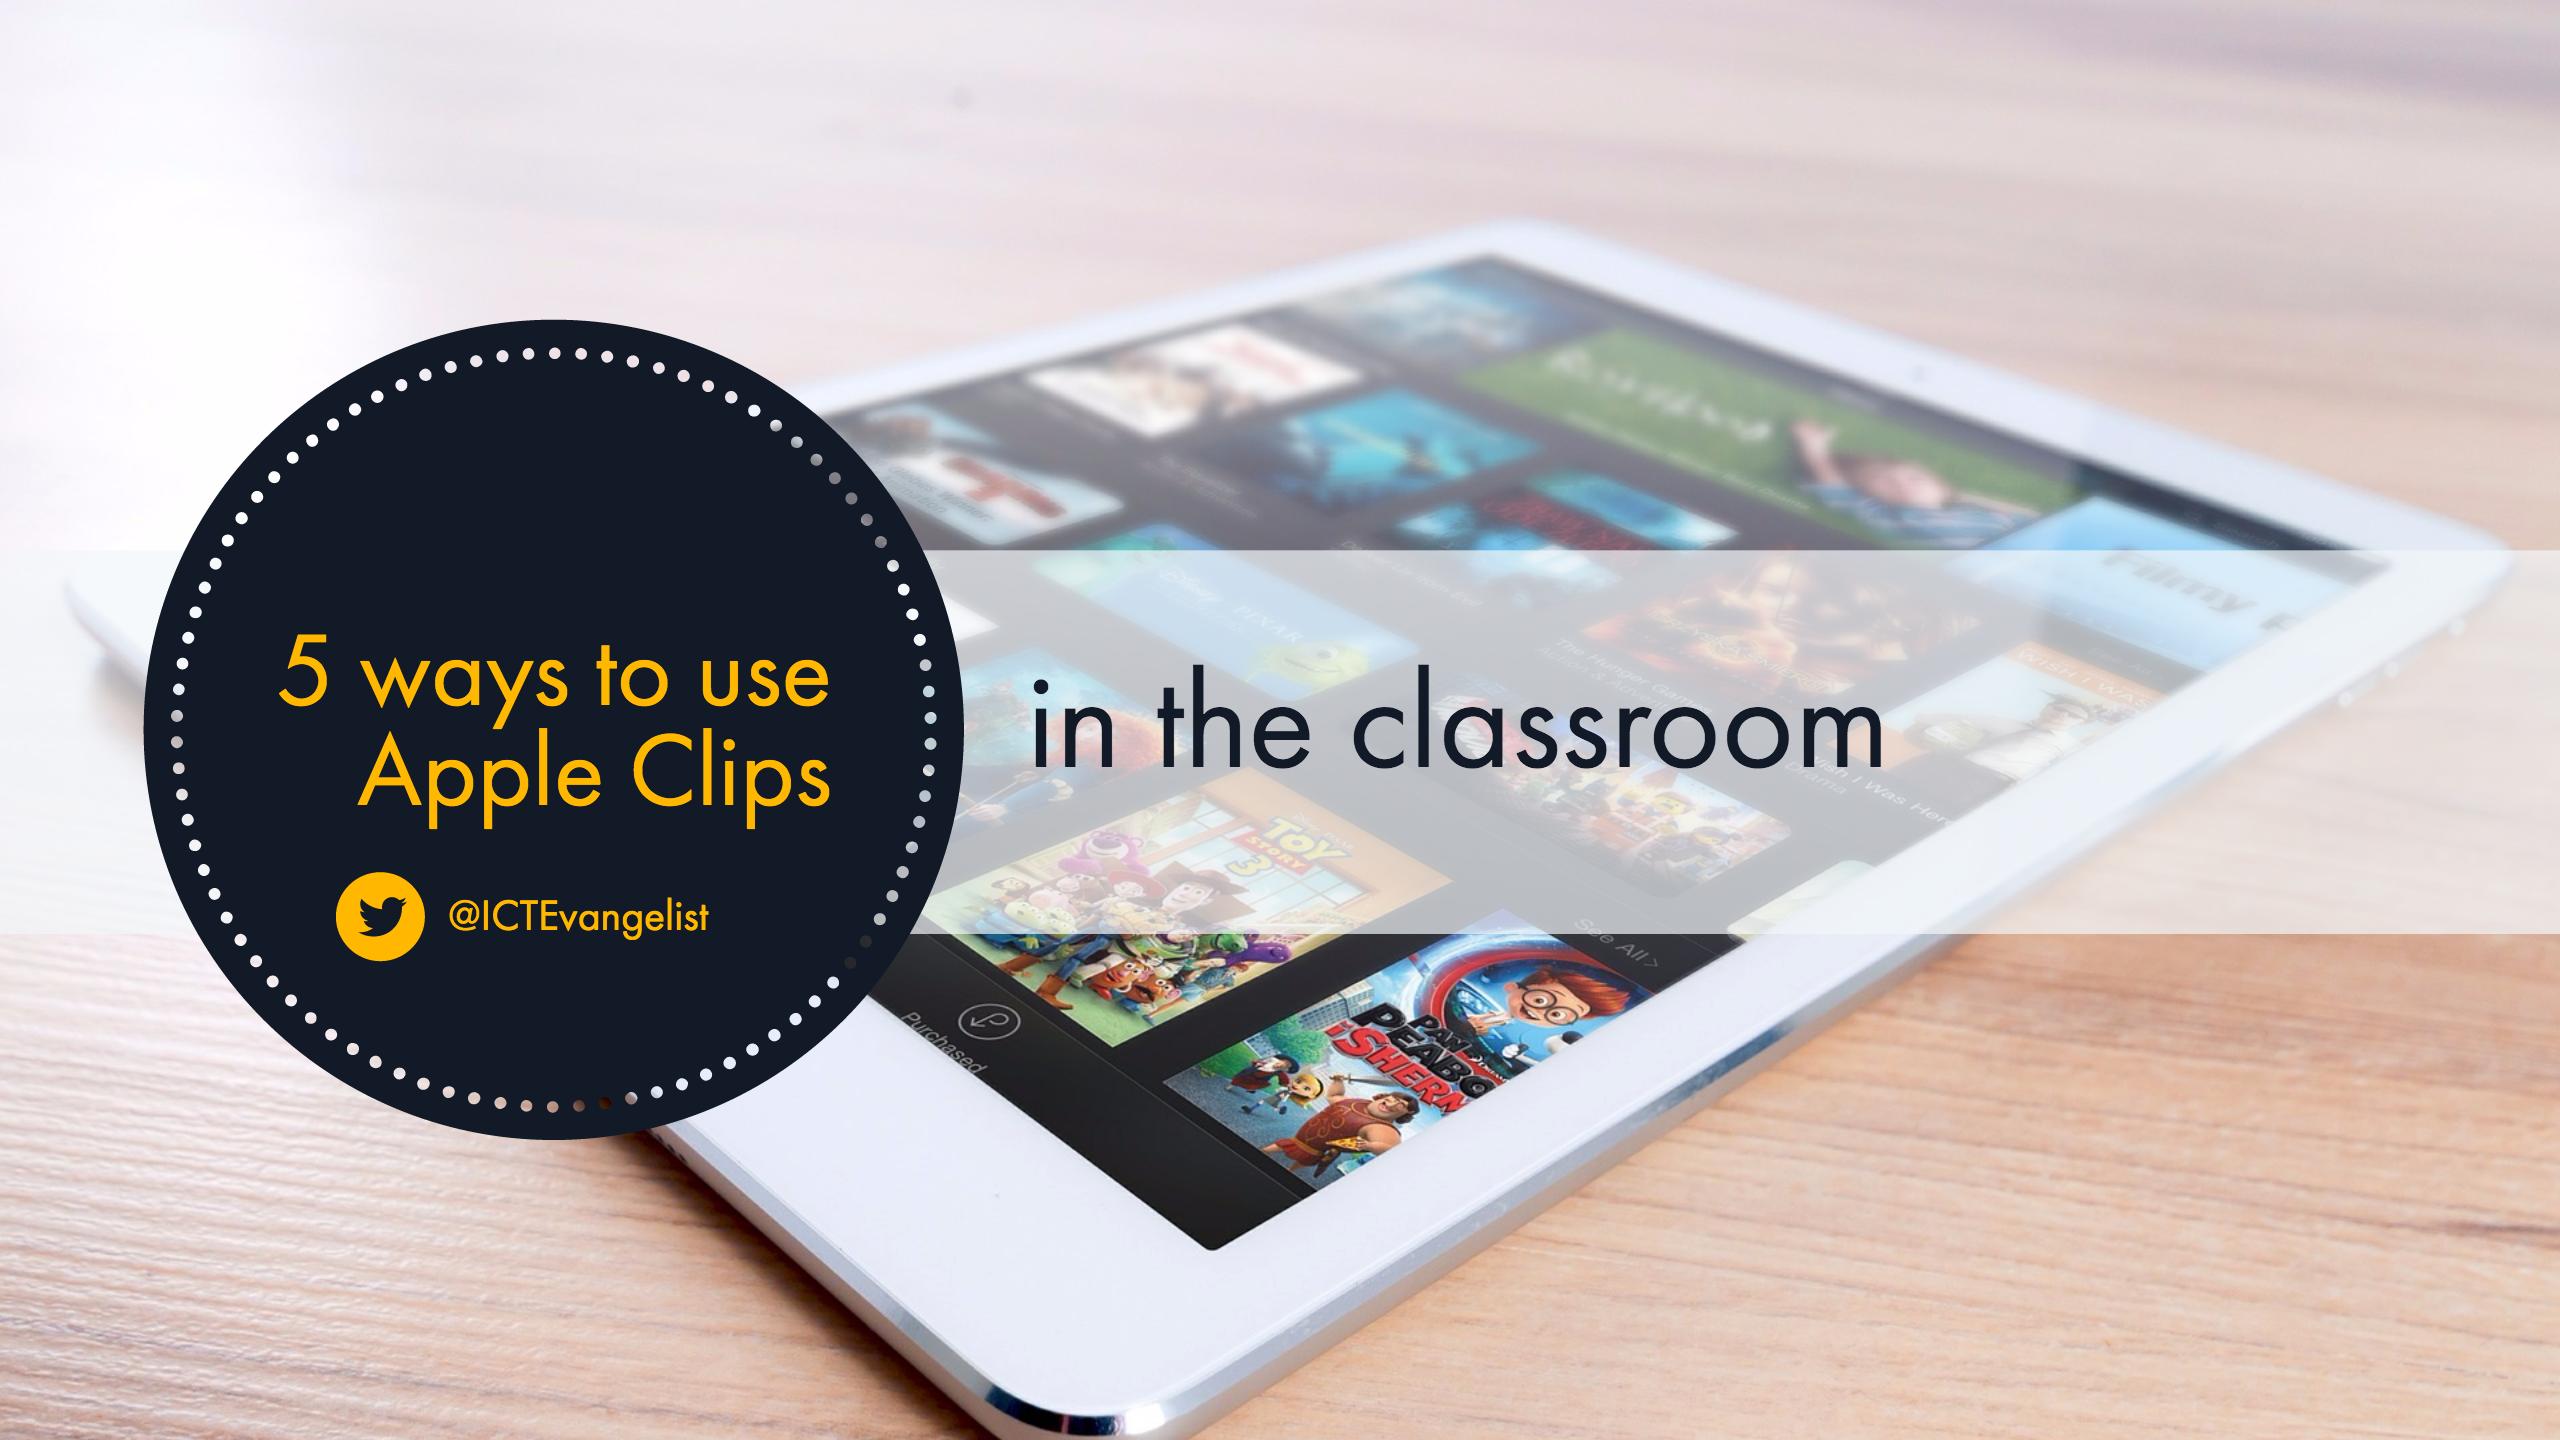 5 ways to use Apple Clips in the classroom